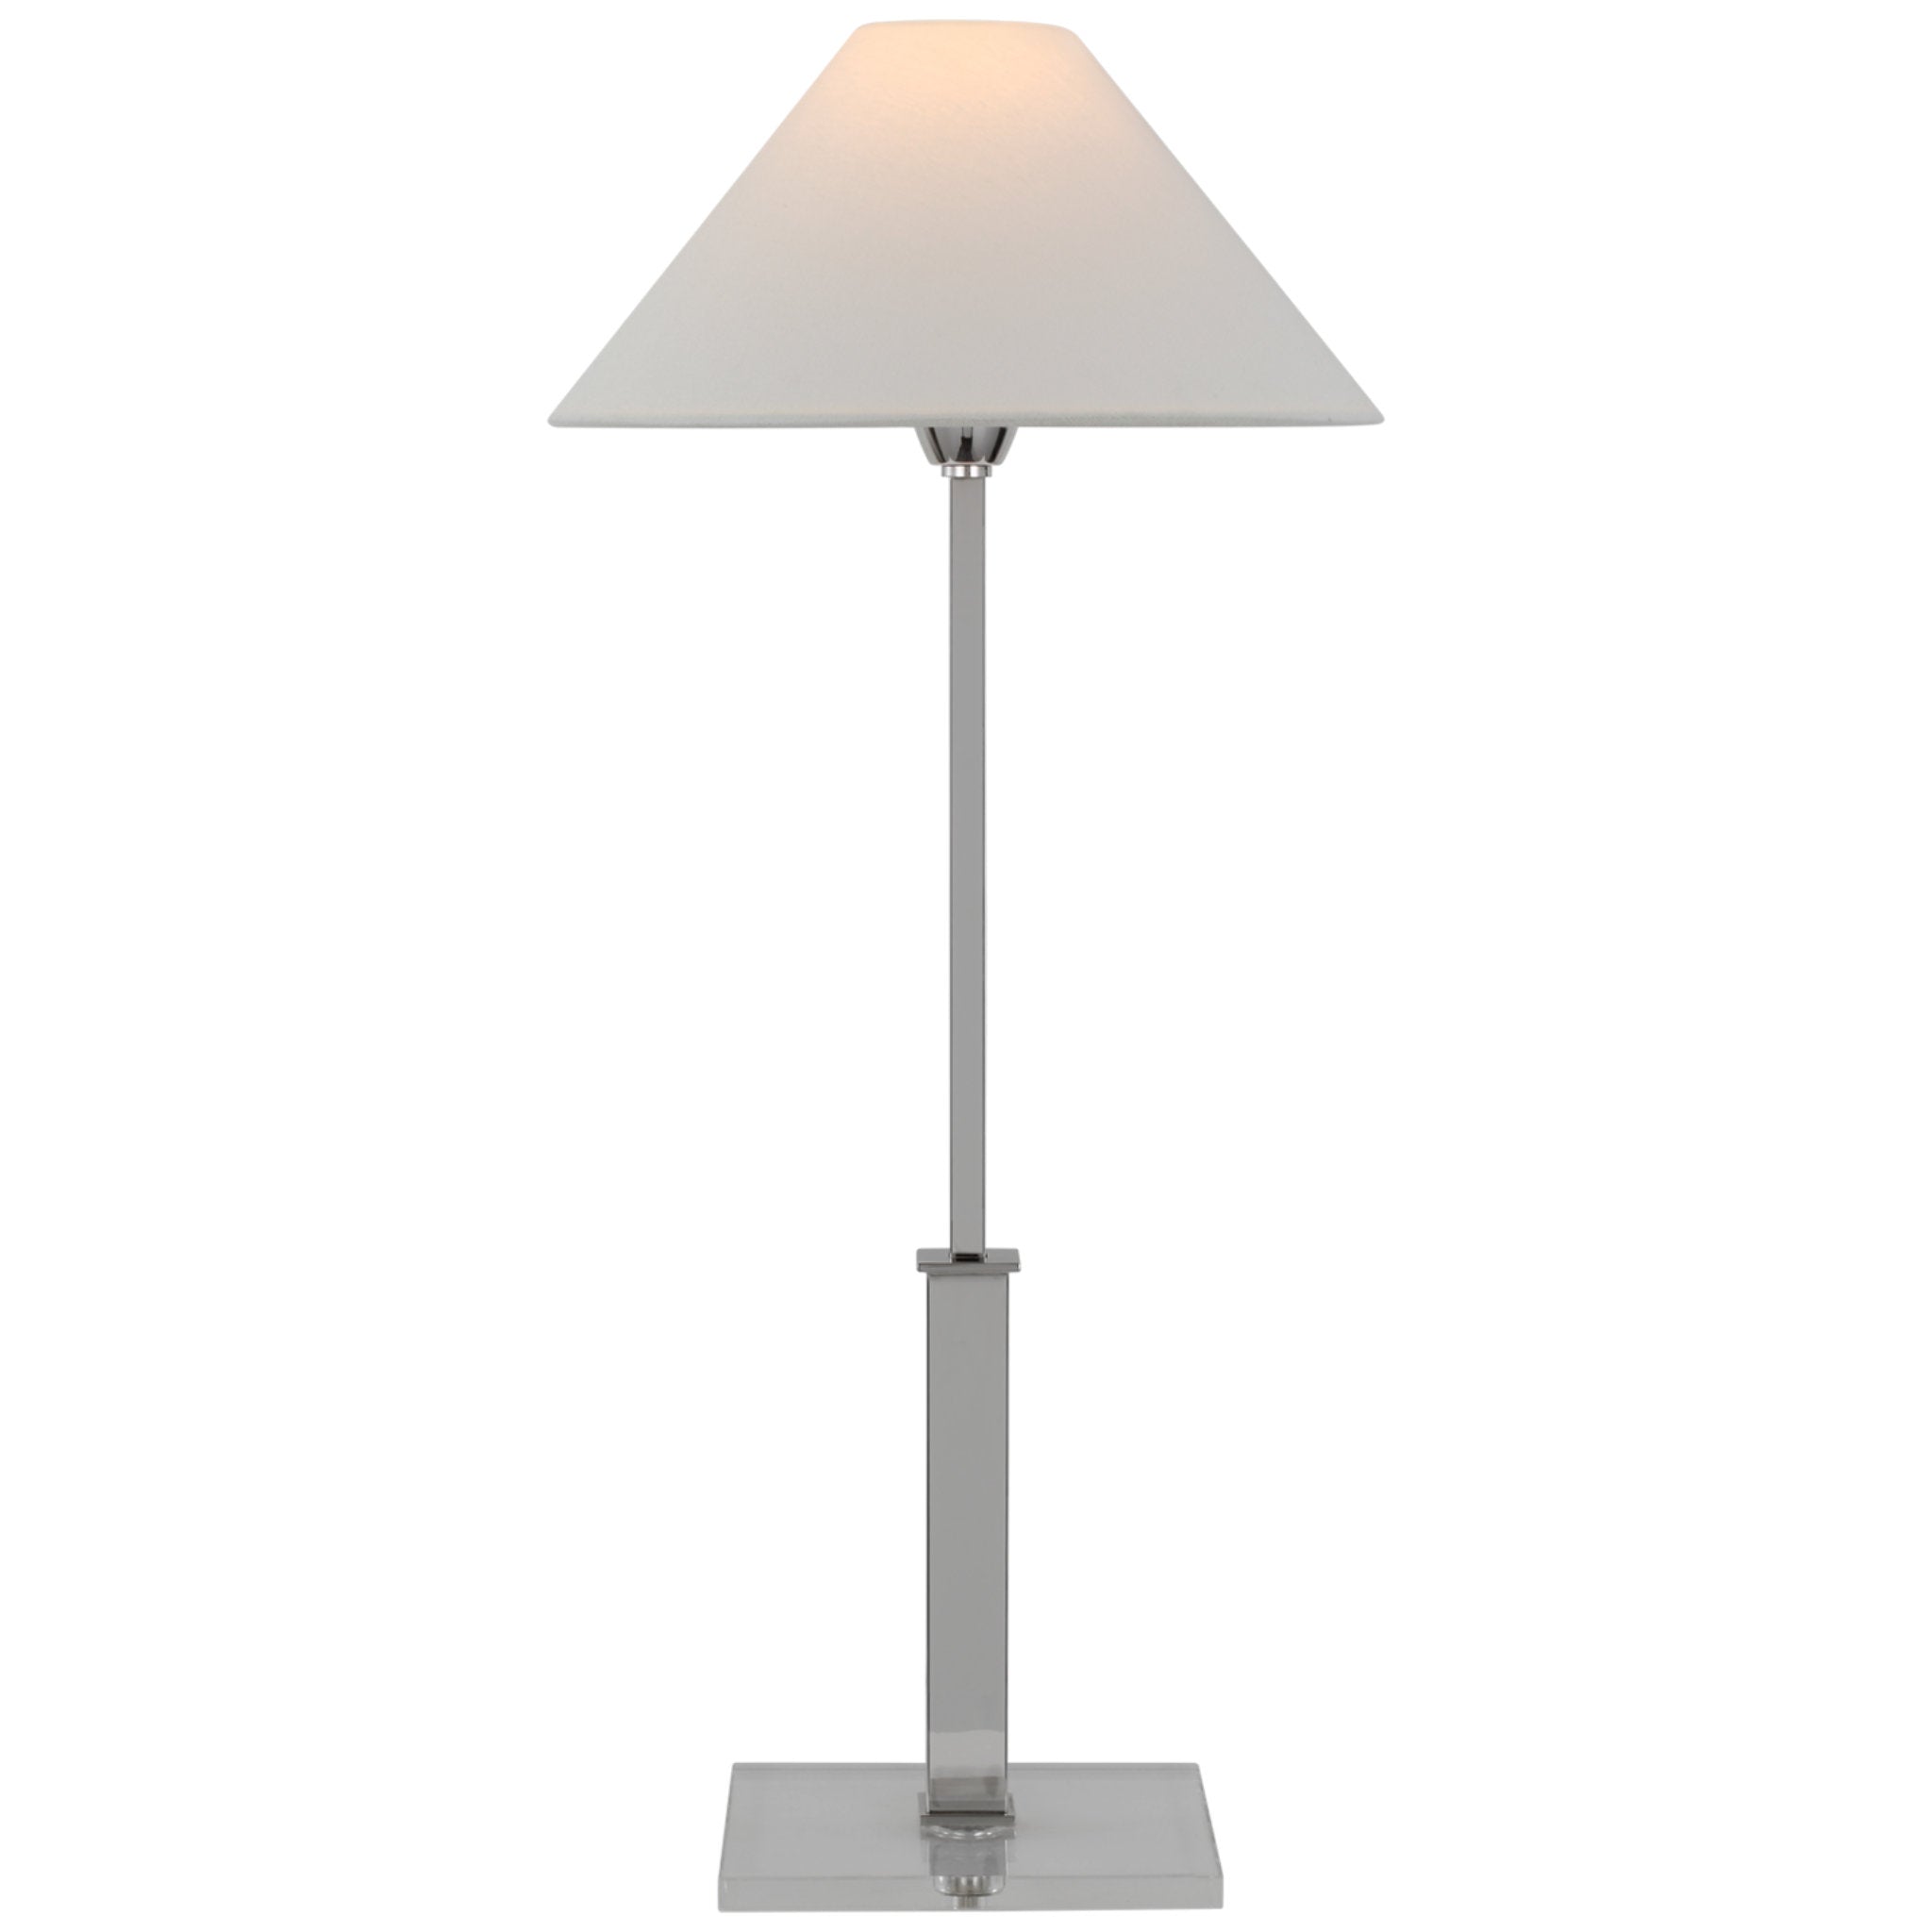 J. Randall Powers Asher Table Lamp in Polished Nickel and Crystal with Linen Shade